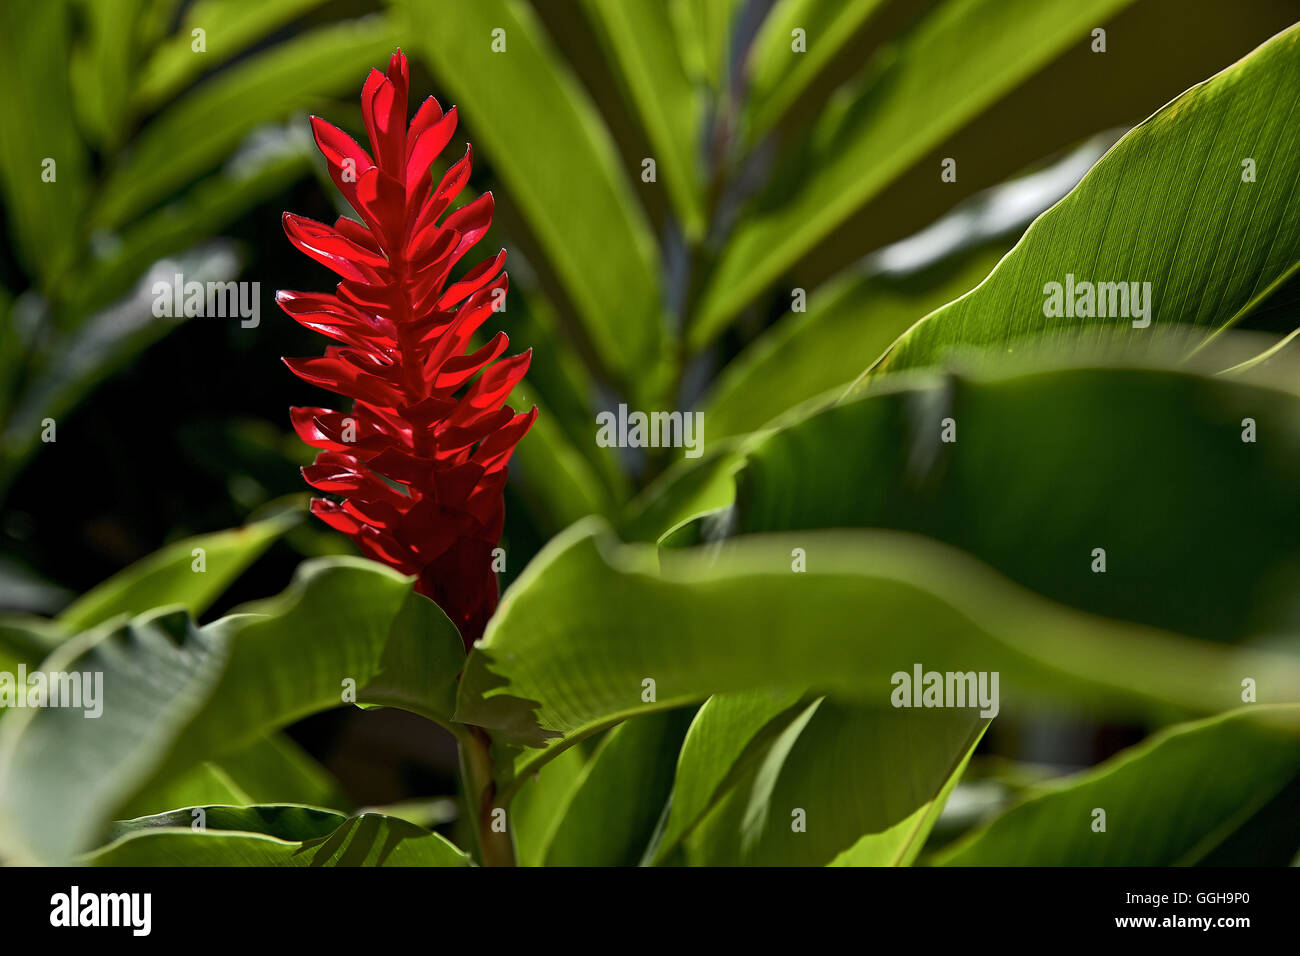 Red blossom, Dominica, Lesser Antilles, Caribbean Stock Photo